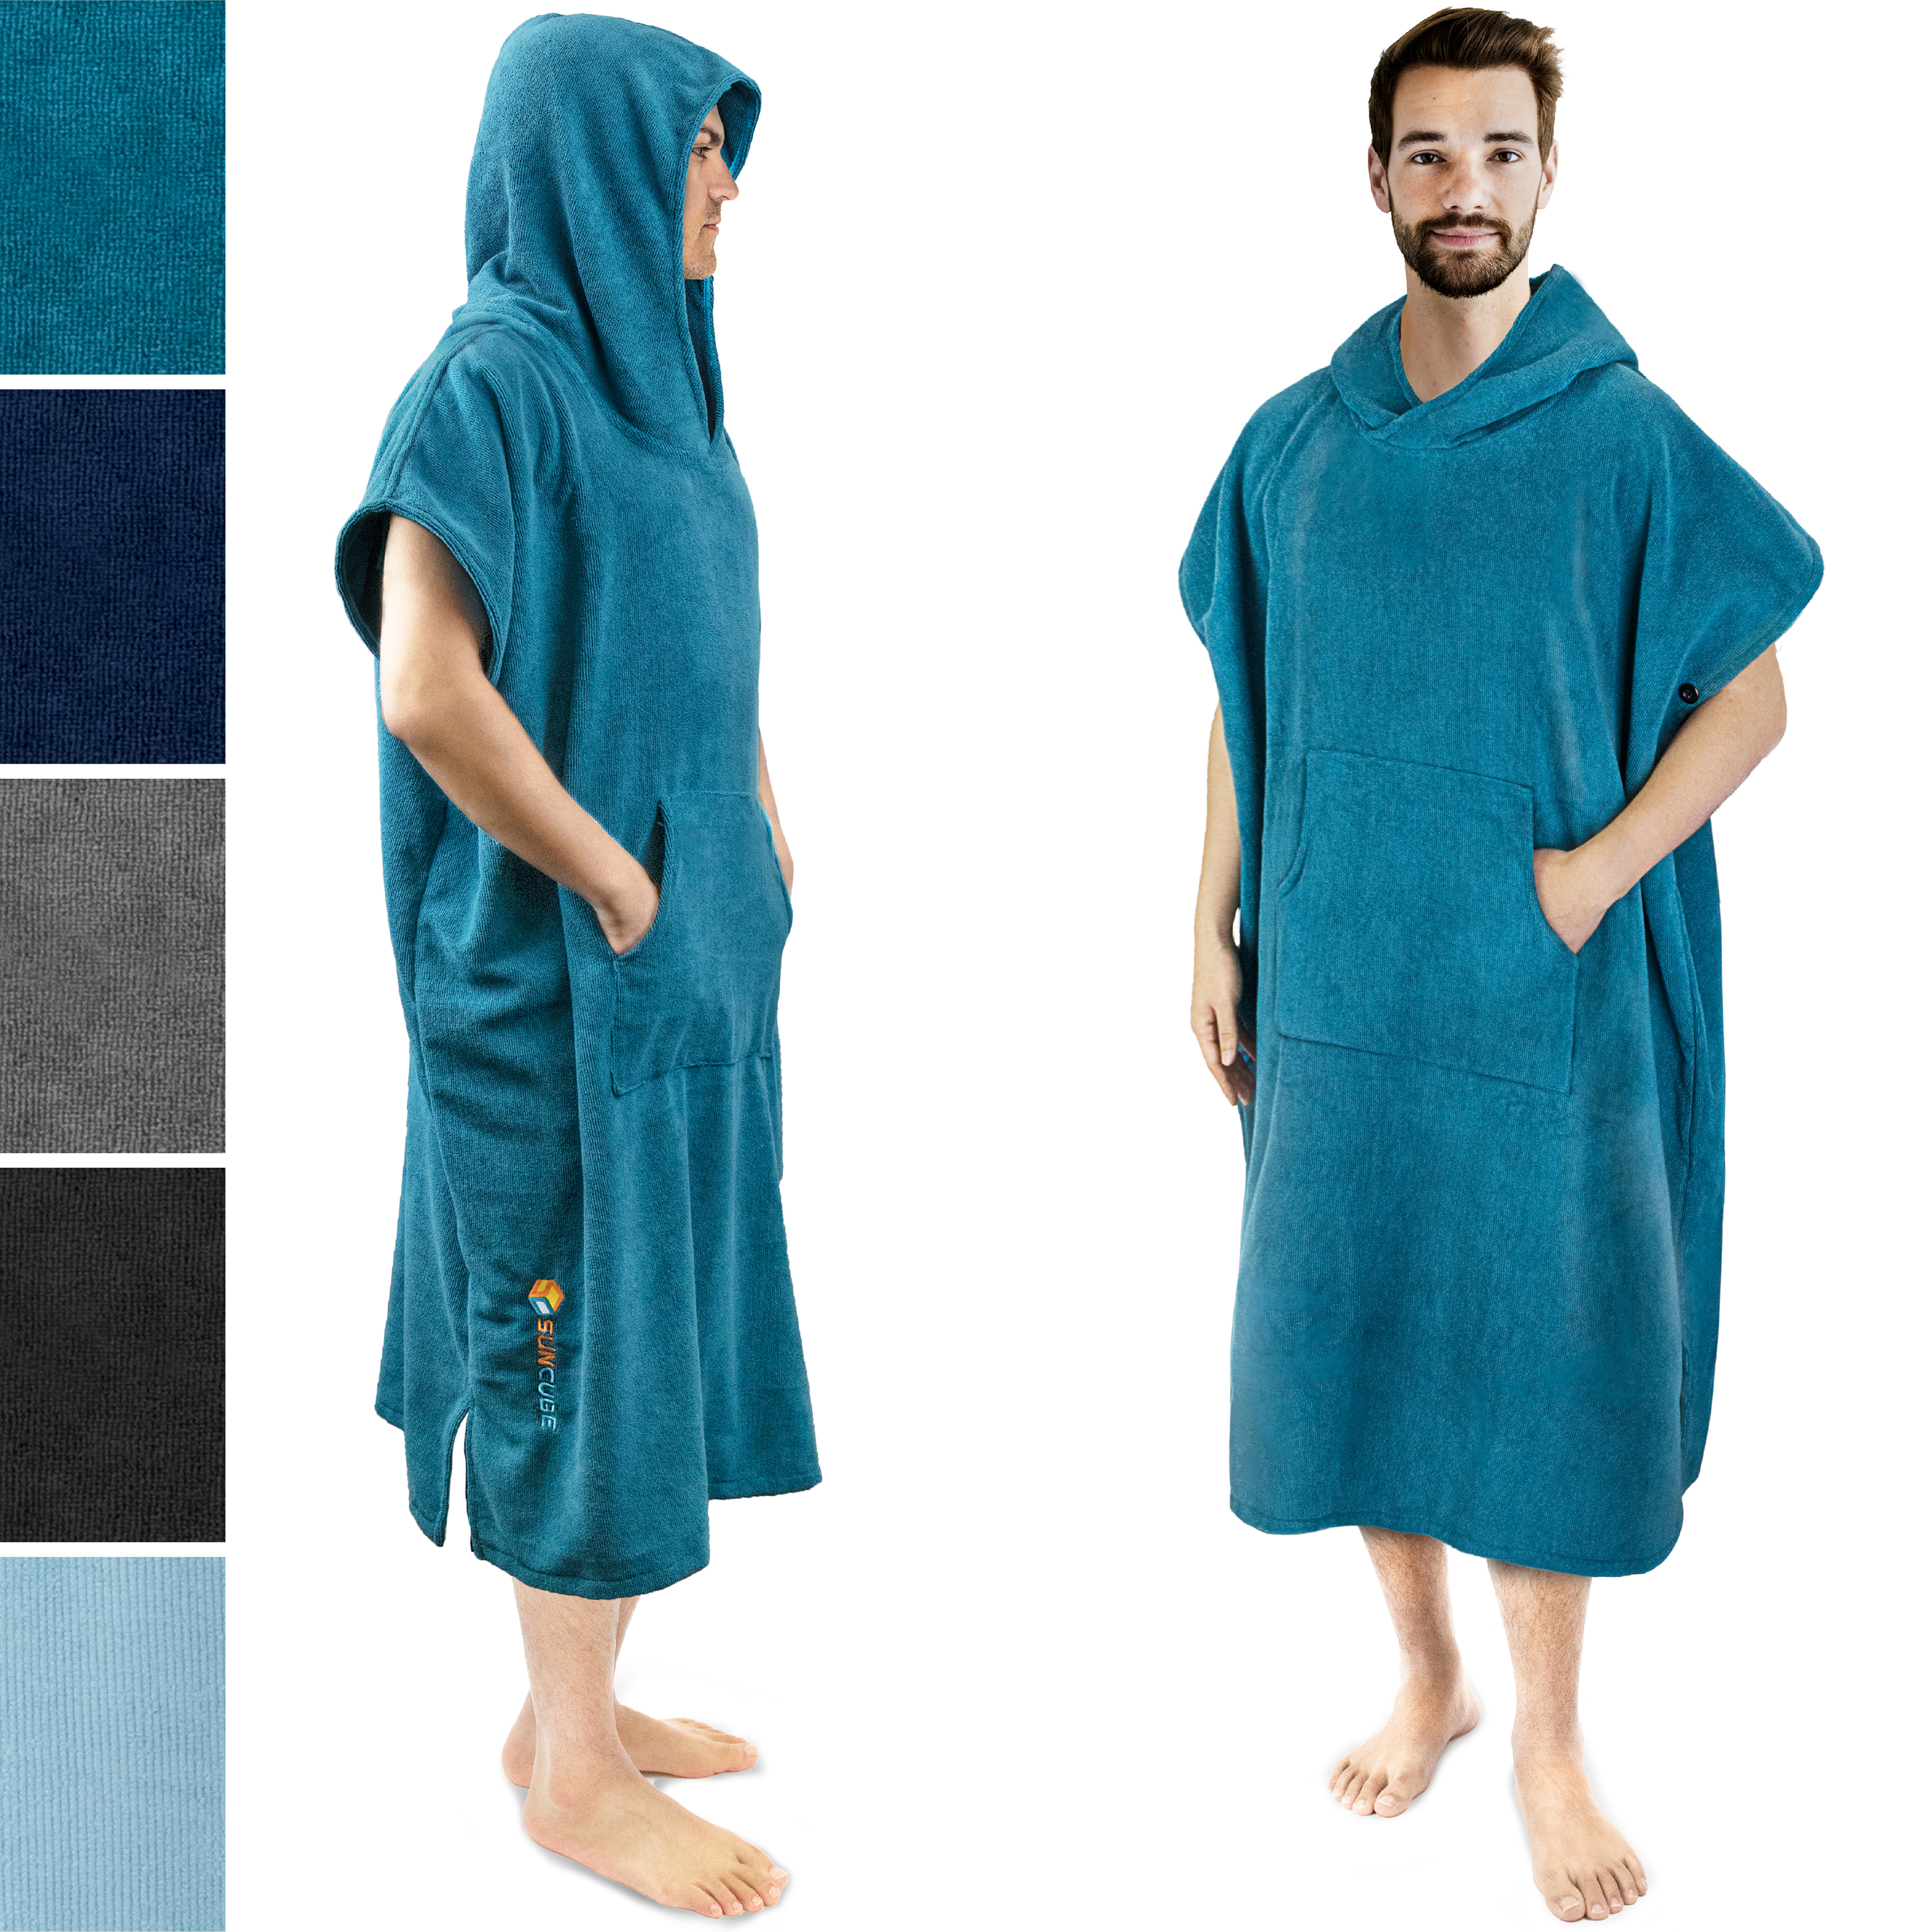 Unisex Beach Bath Surf Poncho Robe With Hood Wetsuit Changing Towel Blue 